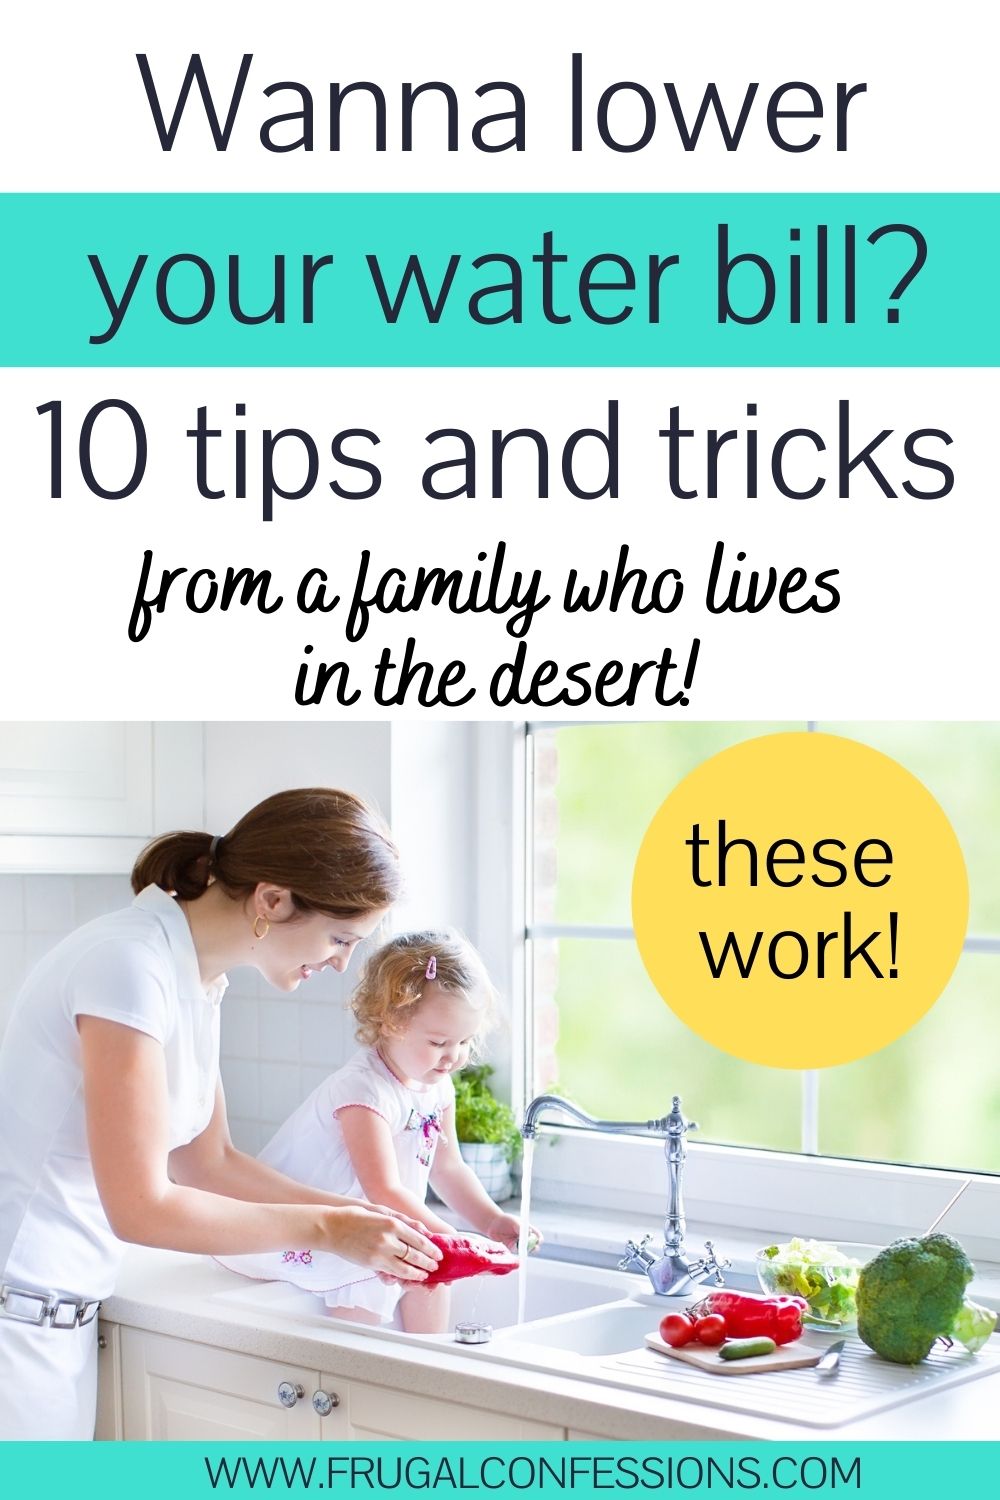 woman with toddler at kitchen sink using water, text overlay "Want to lower your water bill? 10 tips and tricks from a family who lives in the desert"